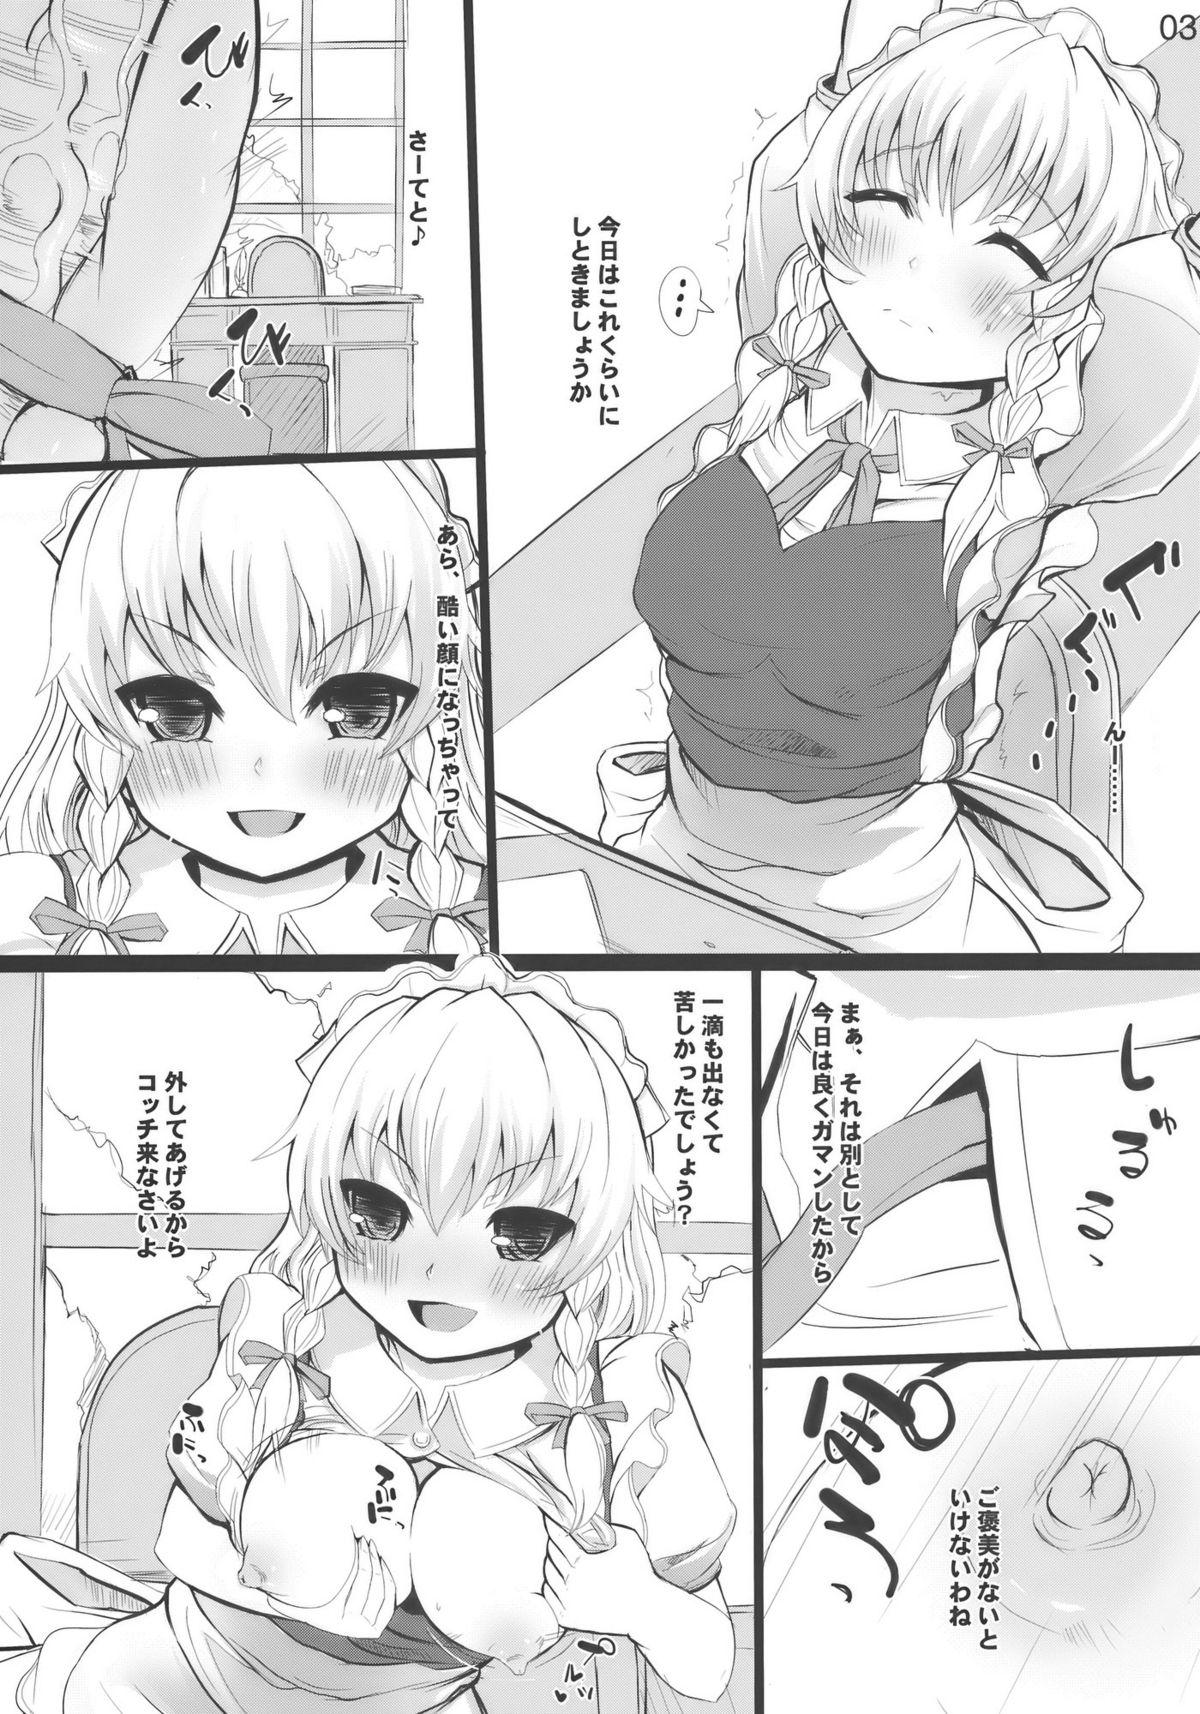 Camgirl Feed me with your Kiss - Touhou project Dancing - Page 3